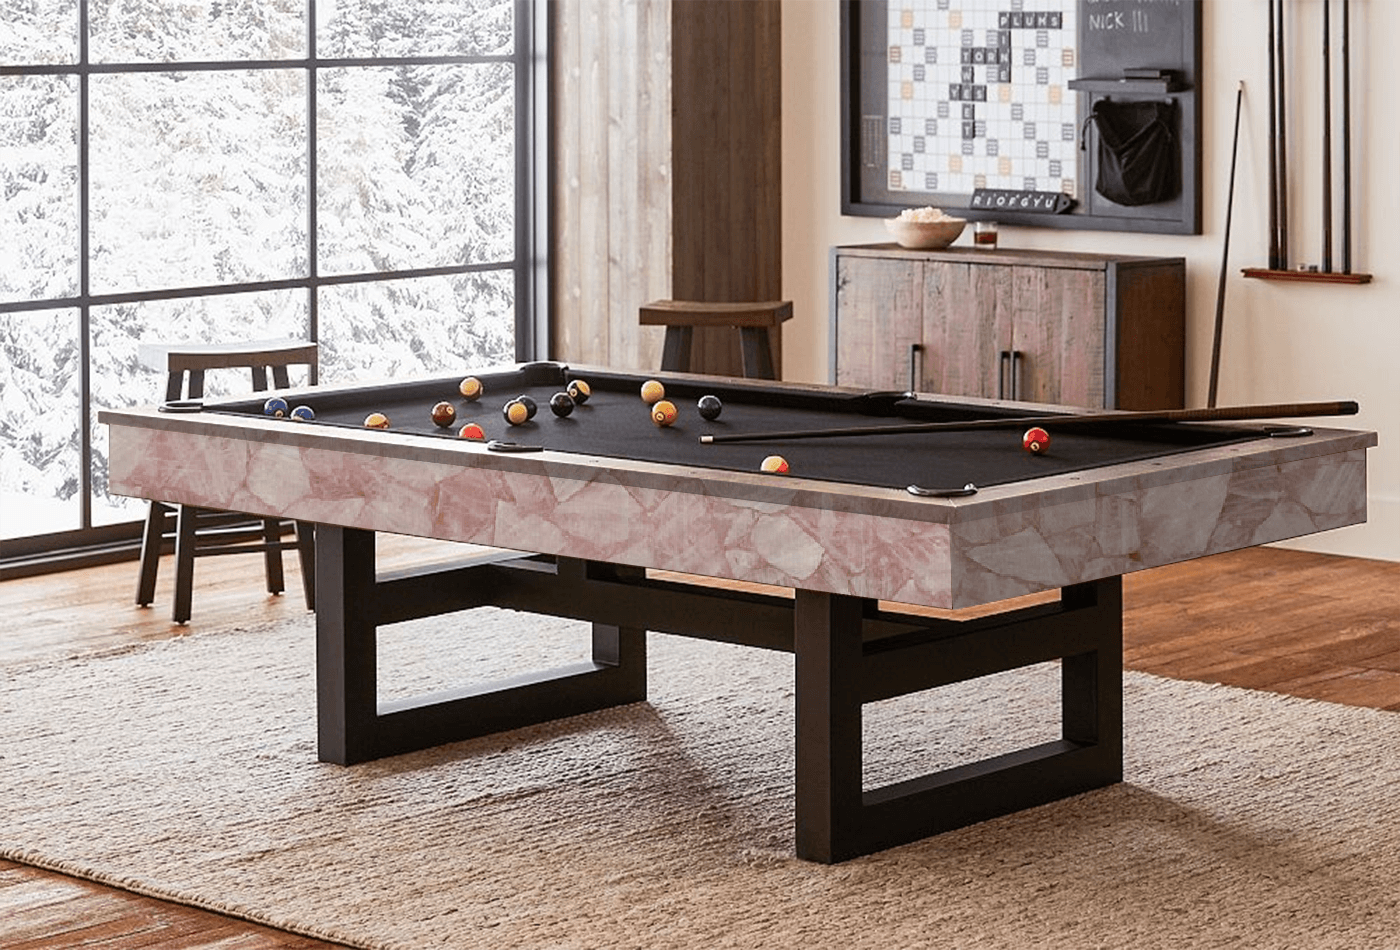 Billiards Table Made of Stone for a Fab Play Hub